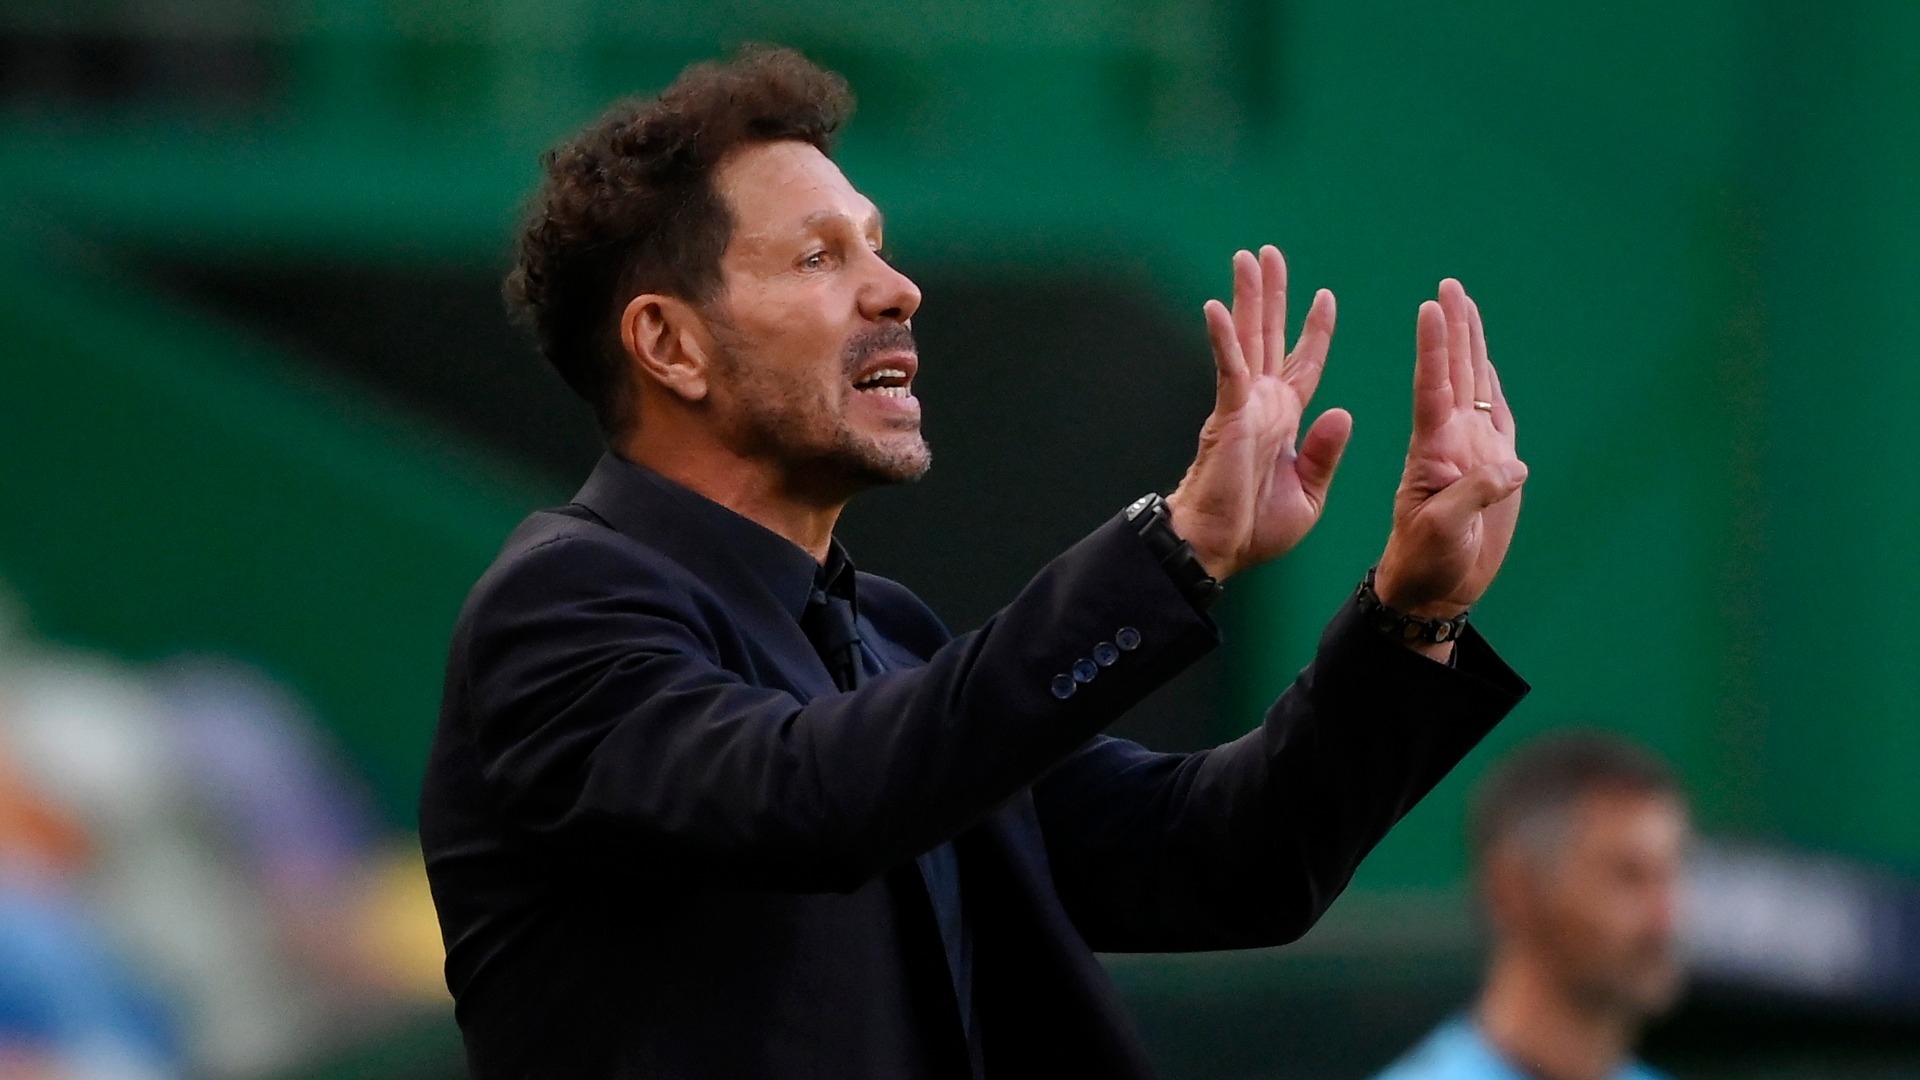 Atletico Madrid were beaten by the better side in the Champions League quarter-finals, Diego Simeone conceded.